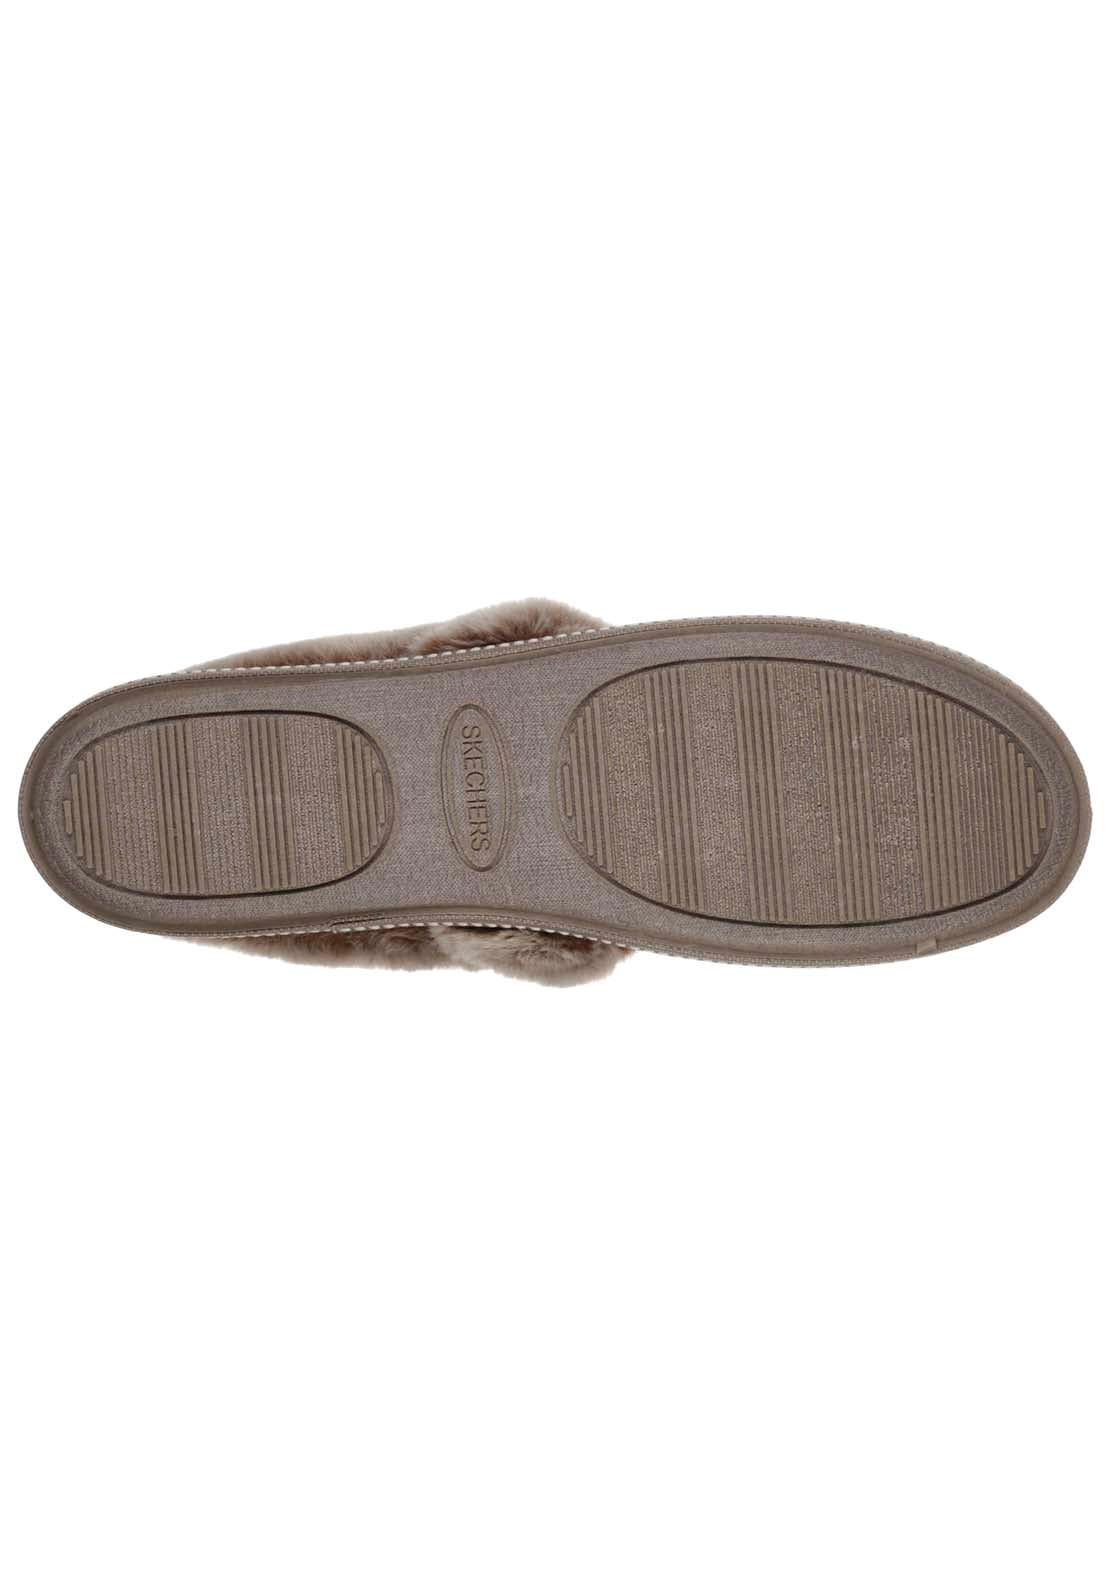 Skechers Cosy Campfire Slipper - Taupe 4 Shaws Department Stores